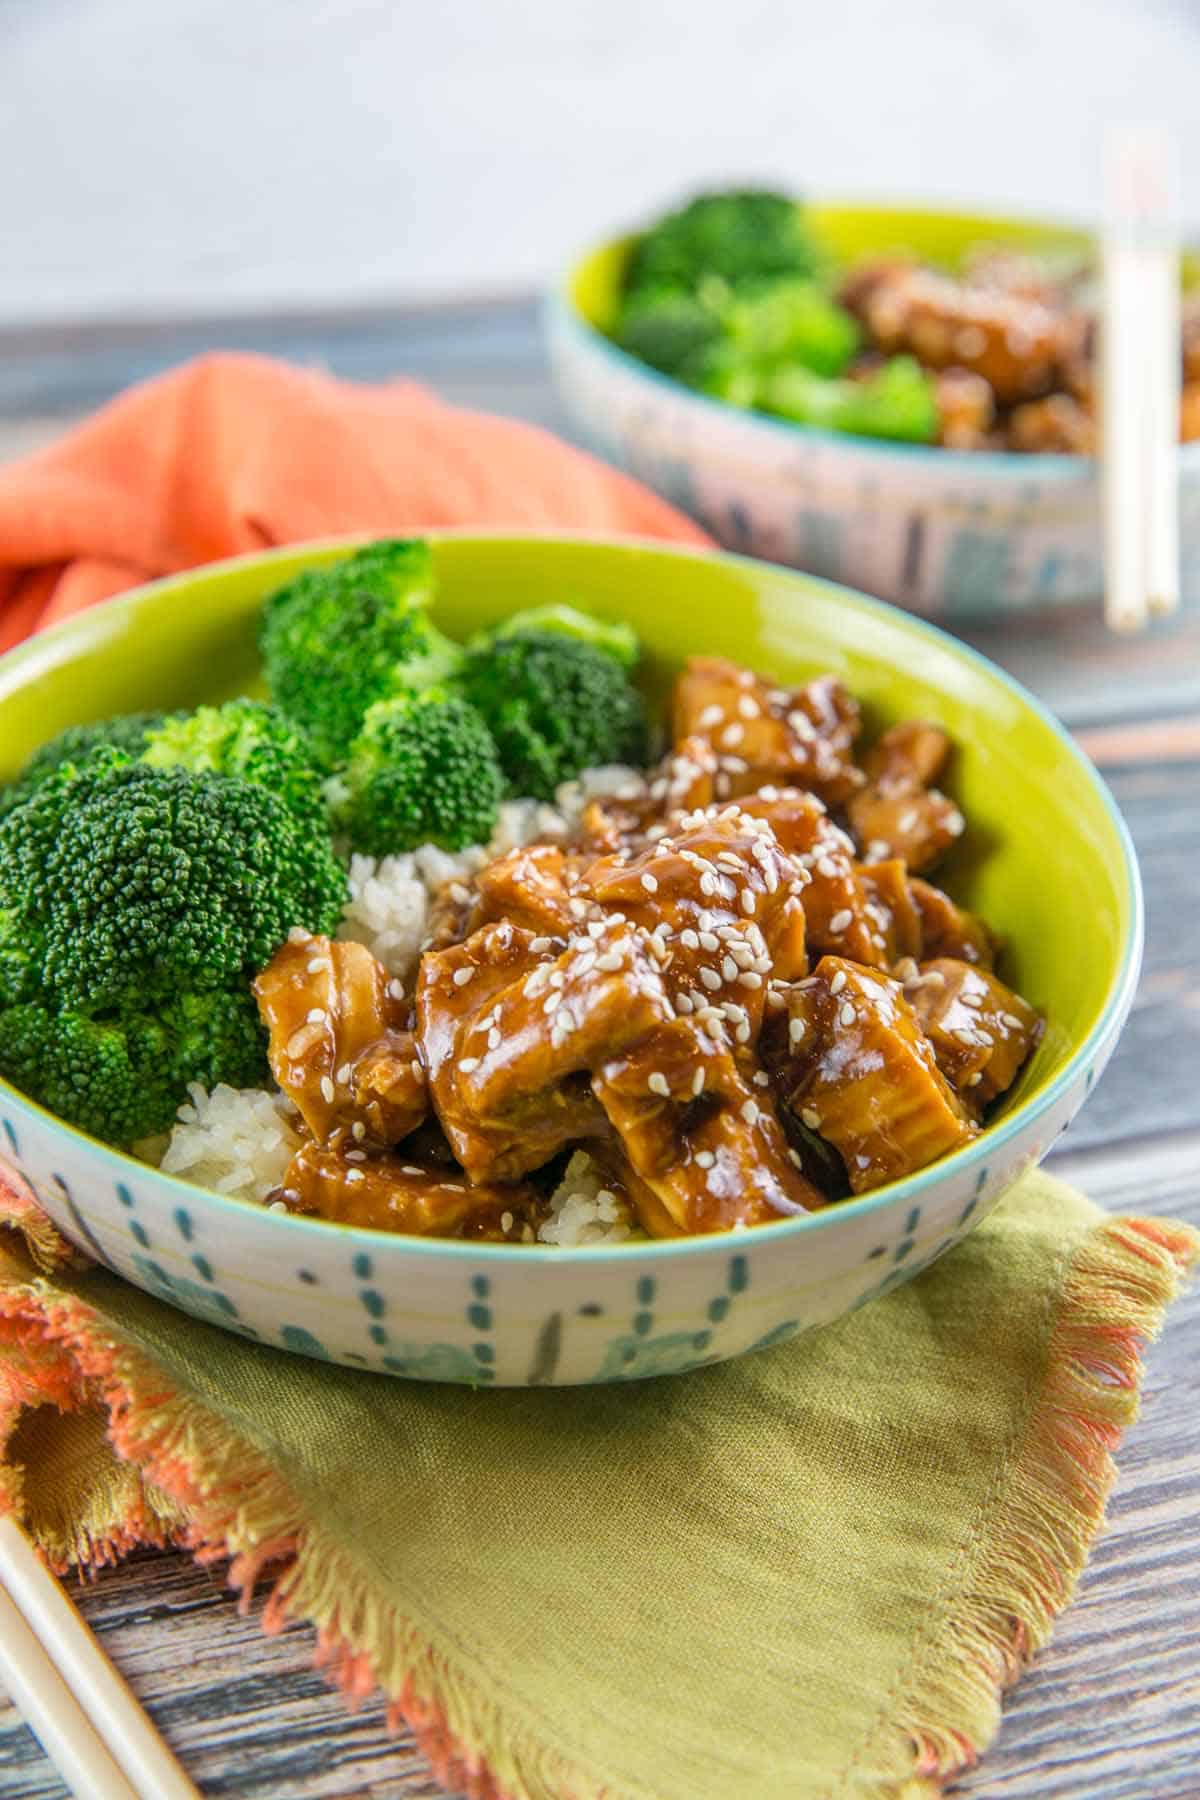 two decorative bowls filled with chicken, broccoli, and rice